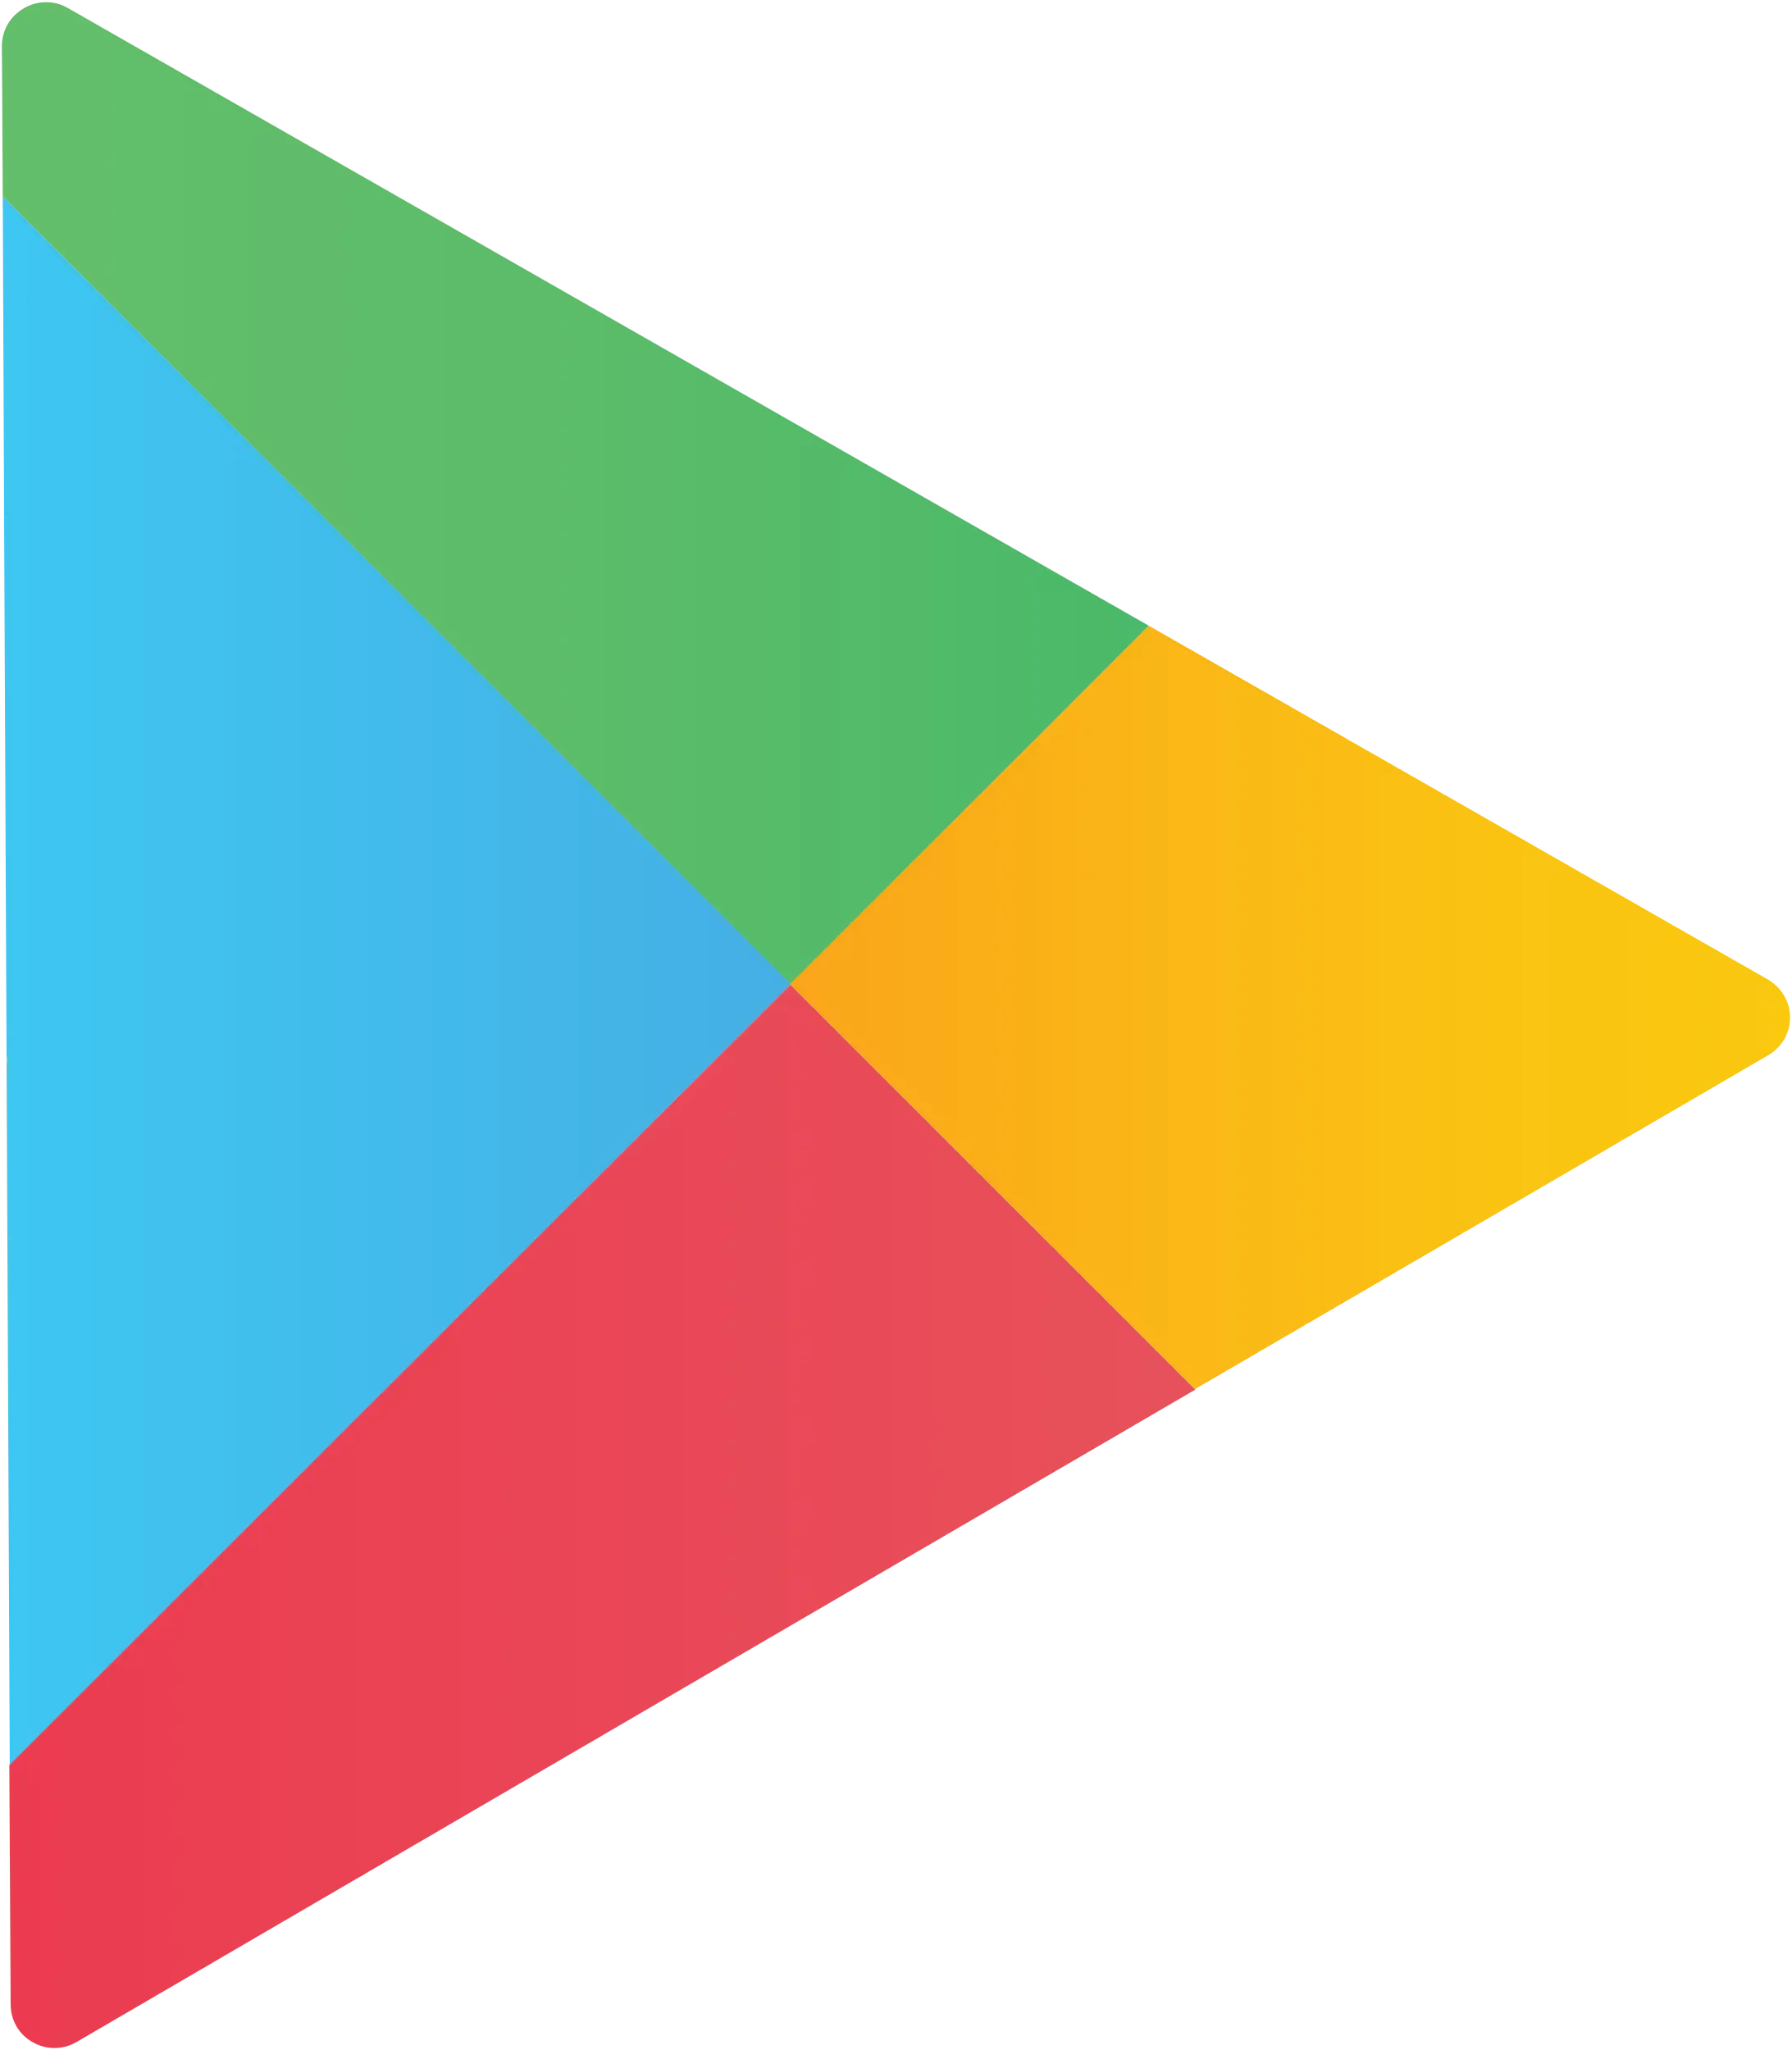 Logo related to technology GooglePlay